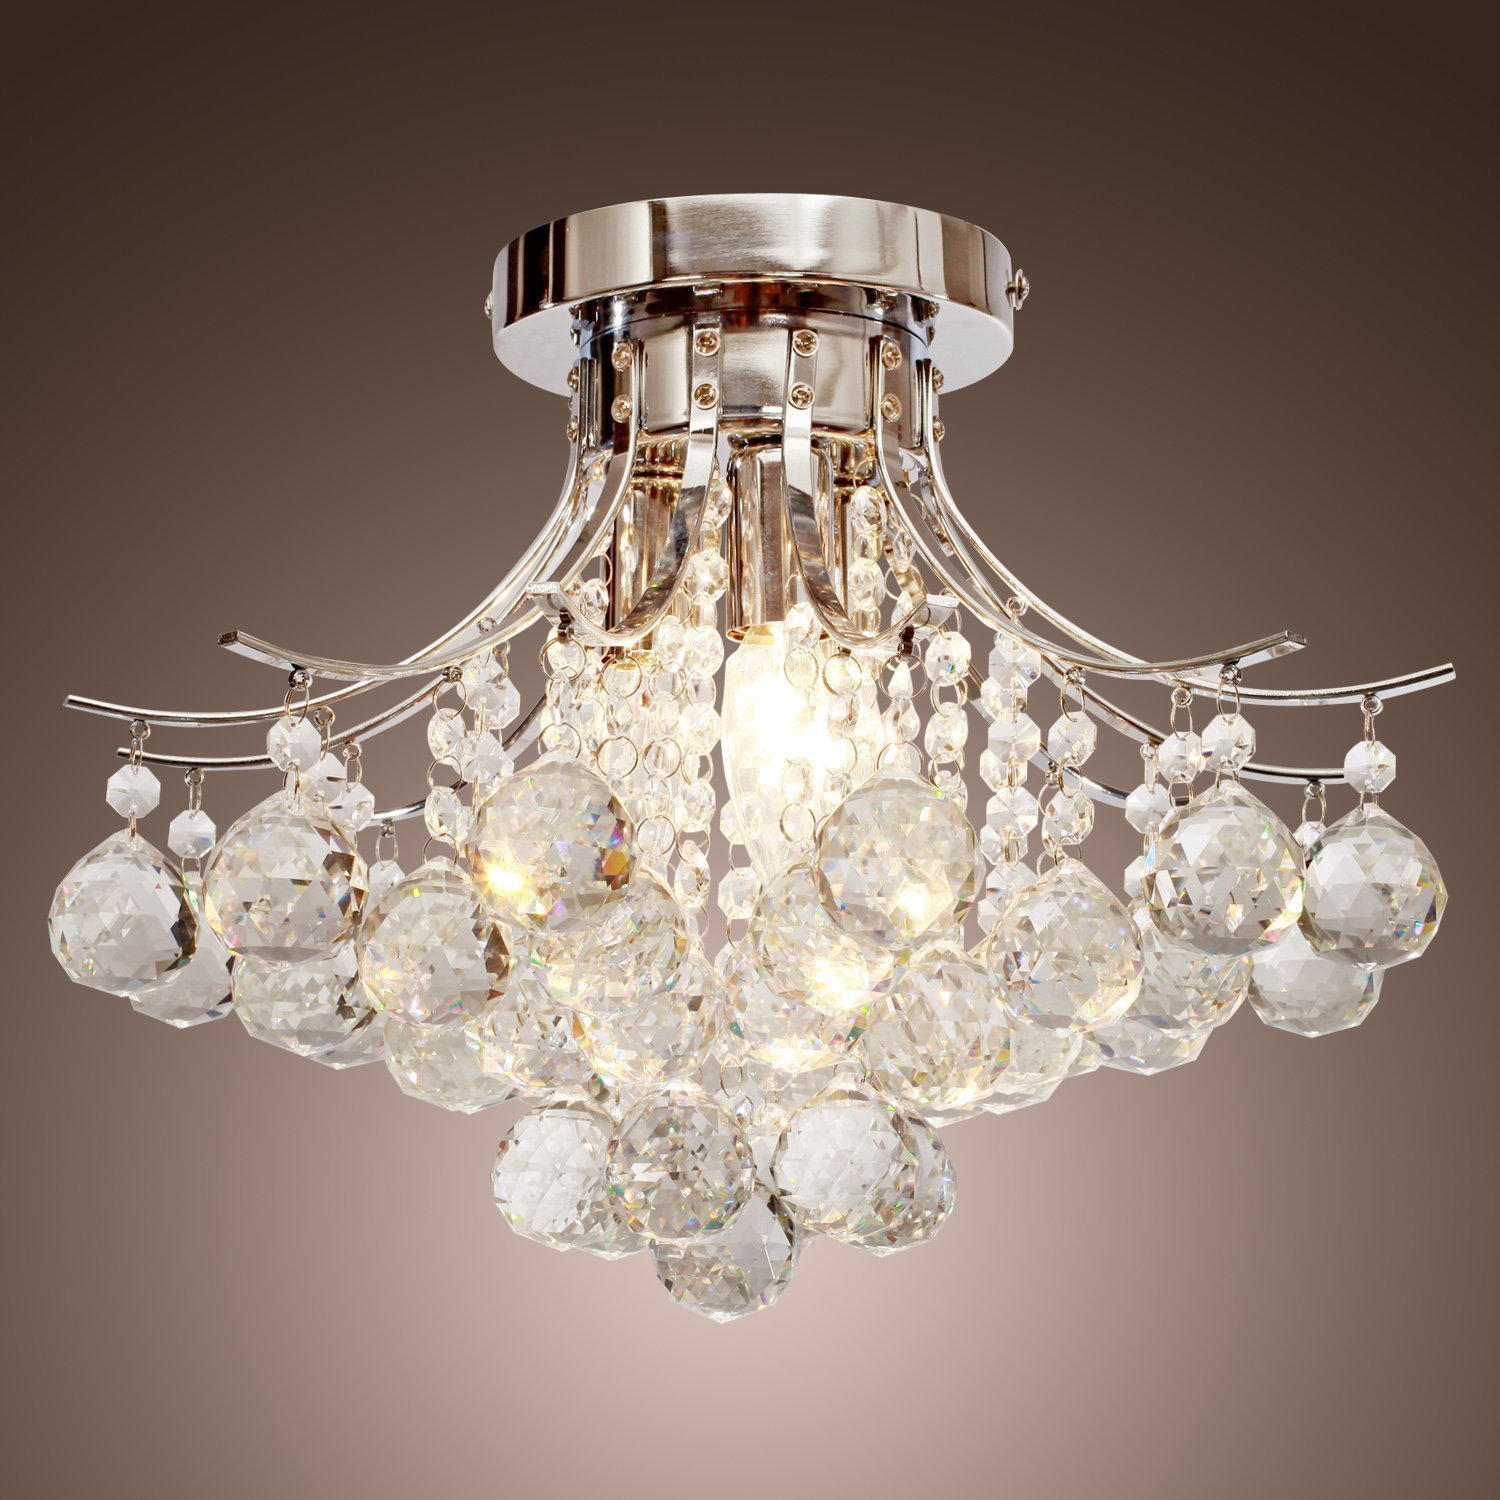 LOCOÂ Chrome Finish Crystal Chandelier with 3 lights, Mini Style ...